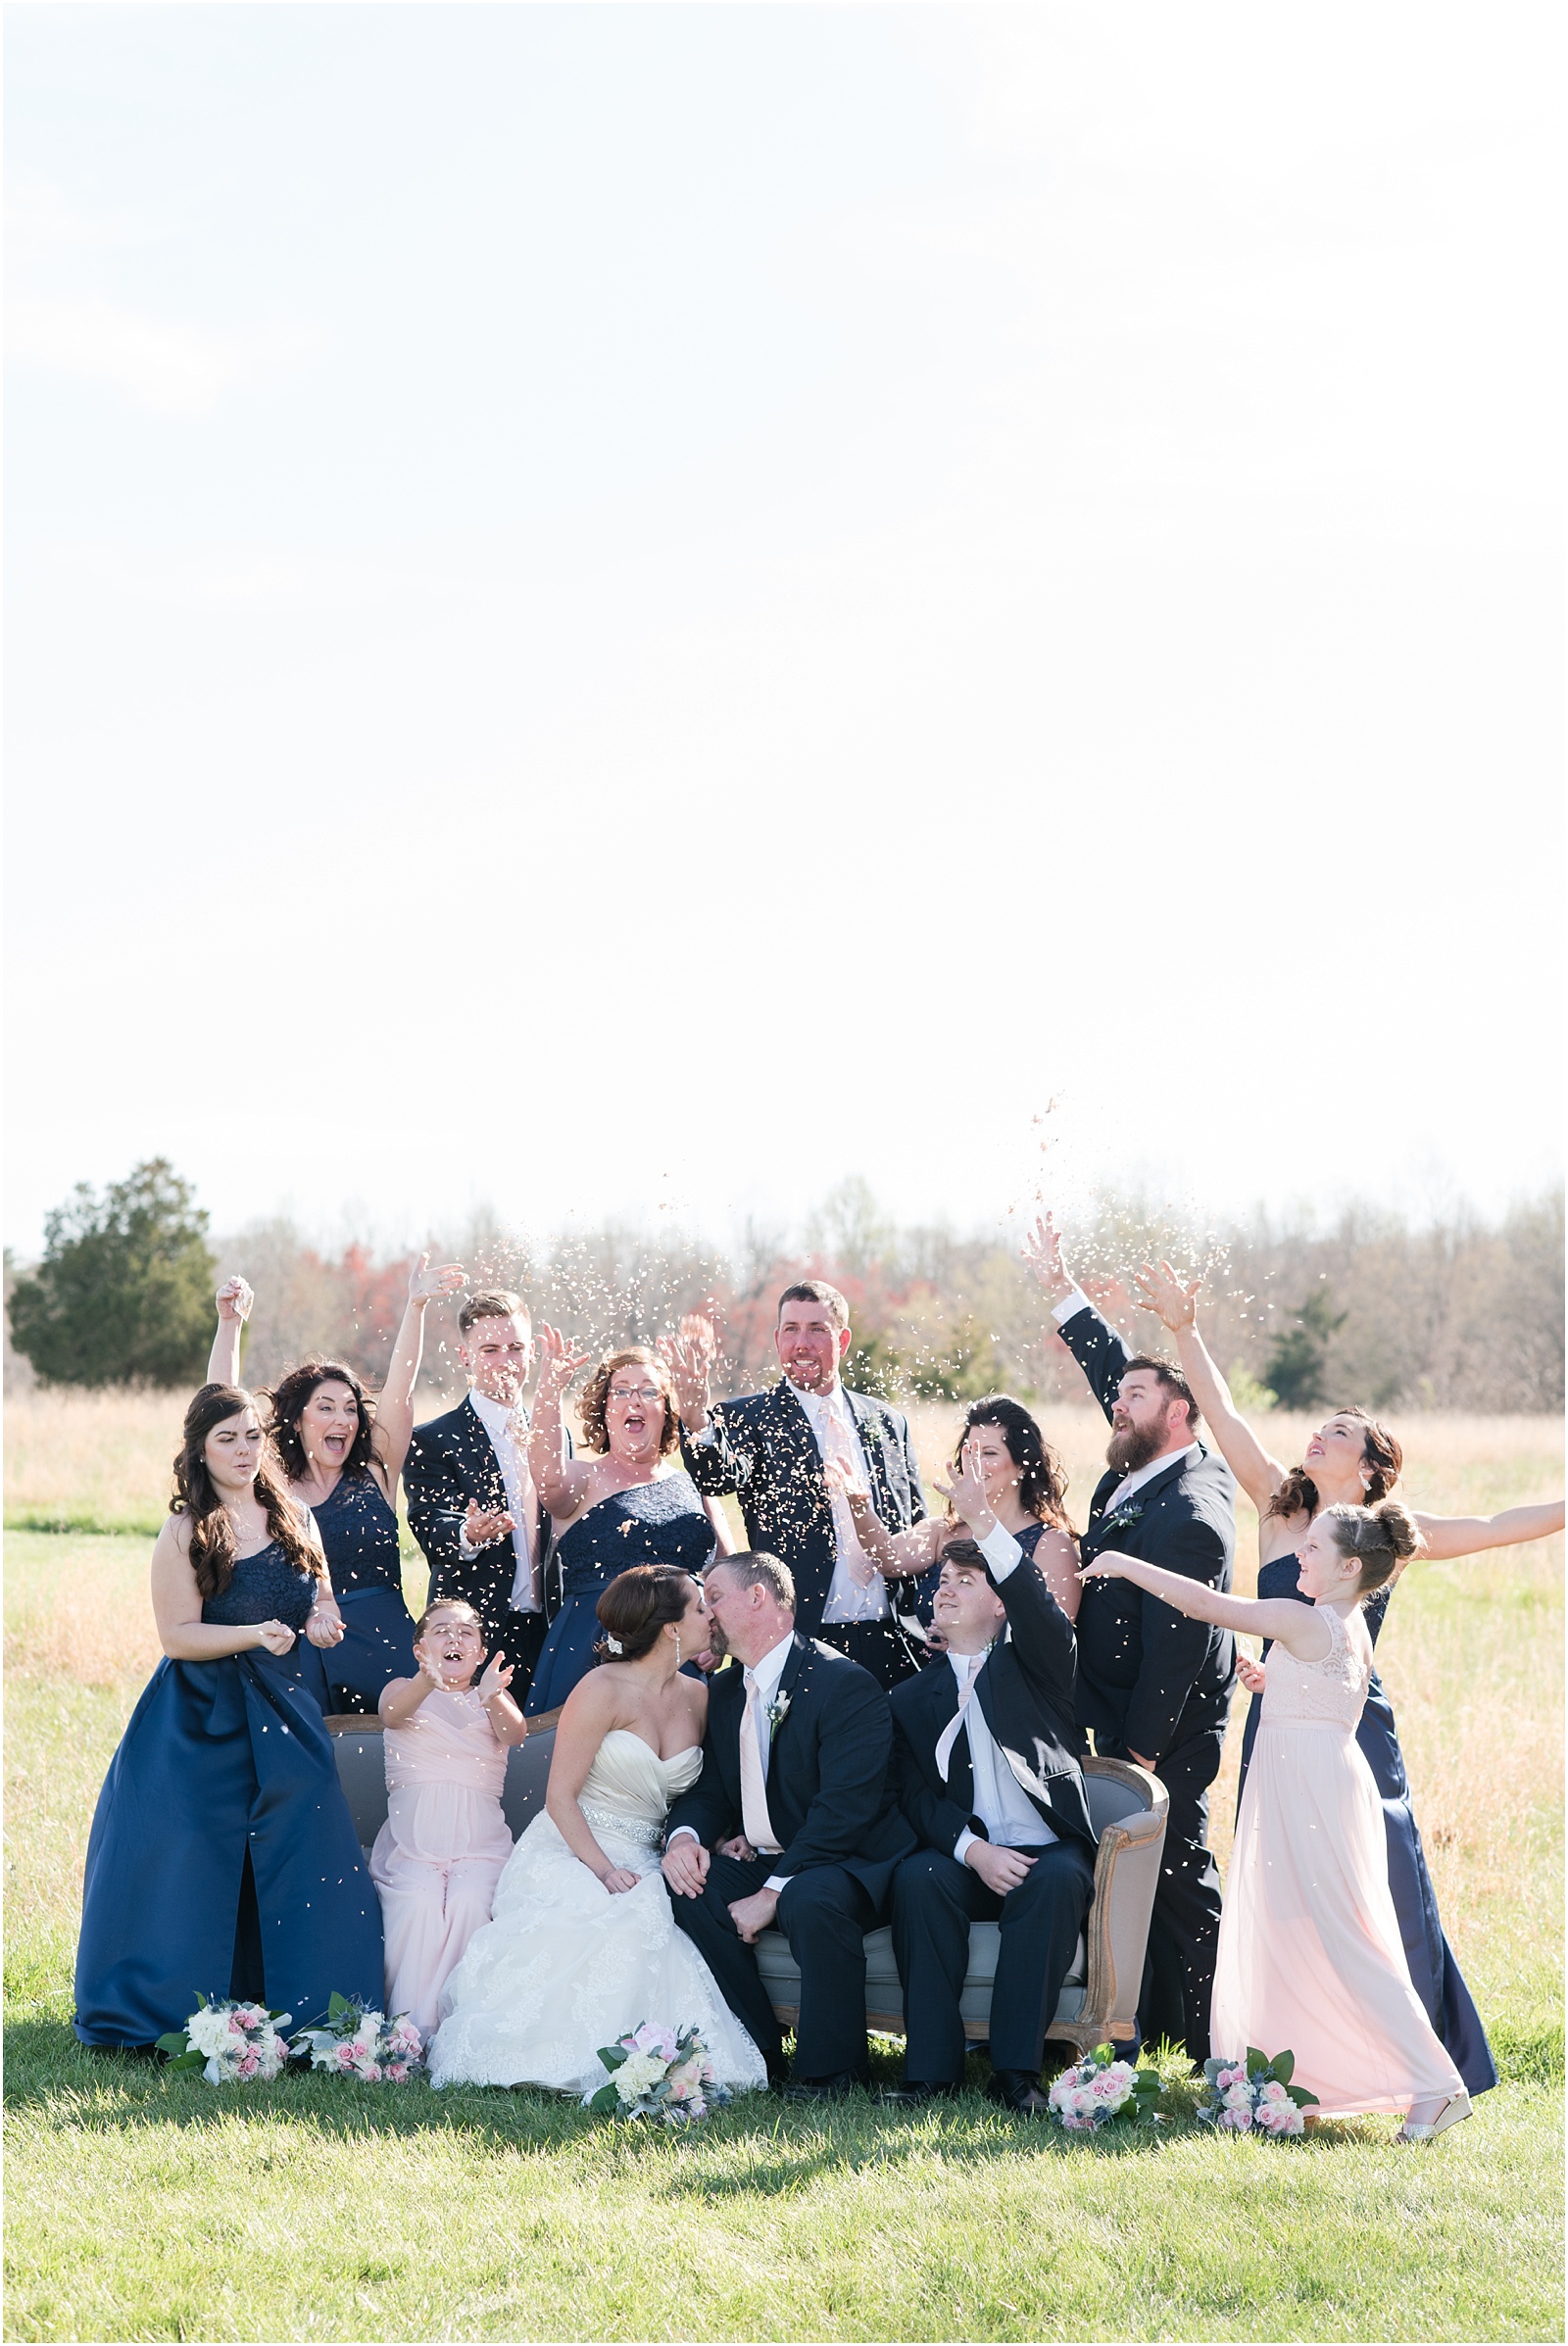 A Country Chic Starlight Meadows Wedding, Burlington NC, Outdoor wedding, blush wedding bouquet, vintage couch, gray vintage couch, bridal party photographs, bridal party, navy blue bridal party, confetti, bridal party confetti